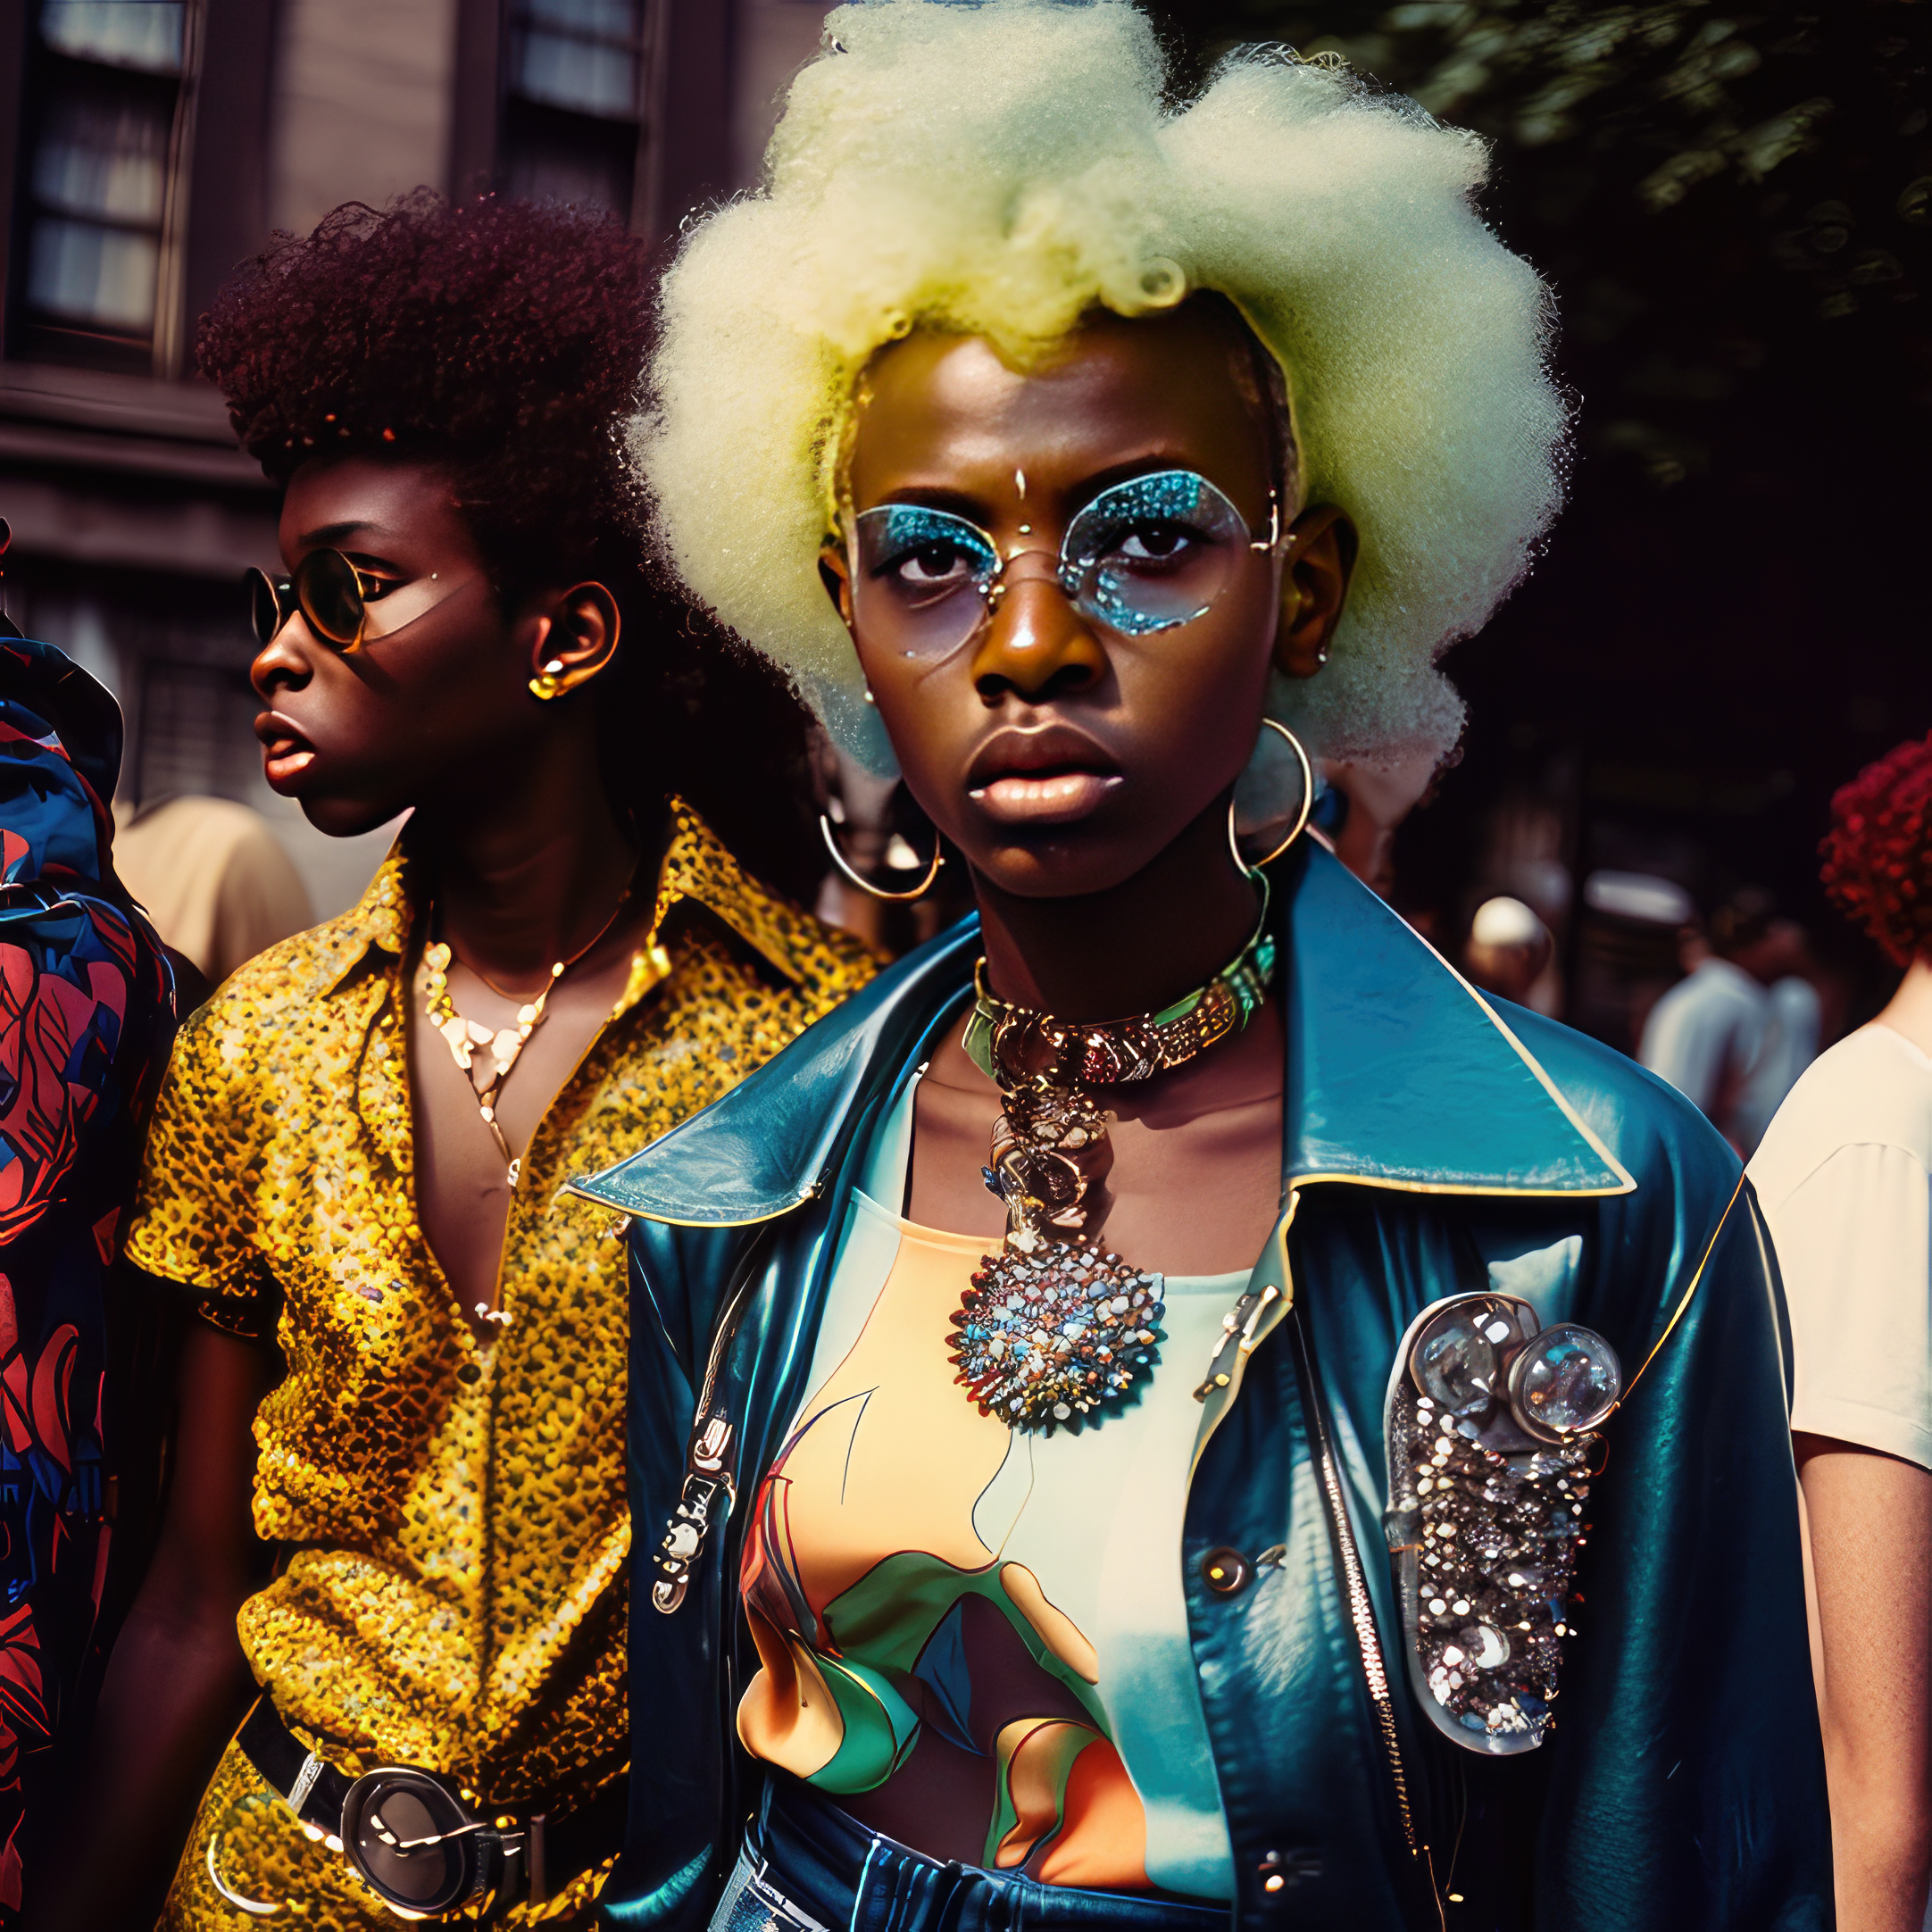 tonycncp_Afro_punk_high_fashion_street_photography_brooklyn_new_9d76eb48-e9a3-47a3-a163-67b9fa9078f1-gigapixel-standard-scale-4_00x.png